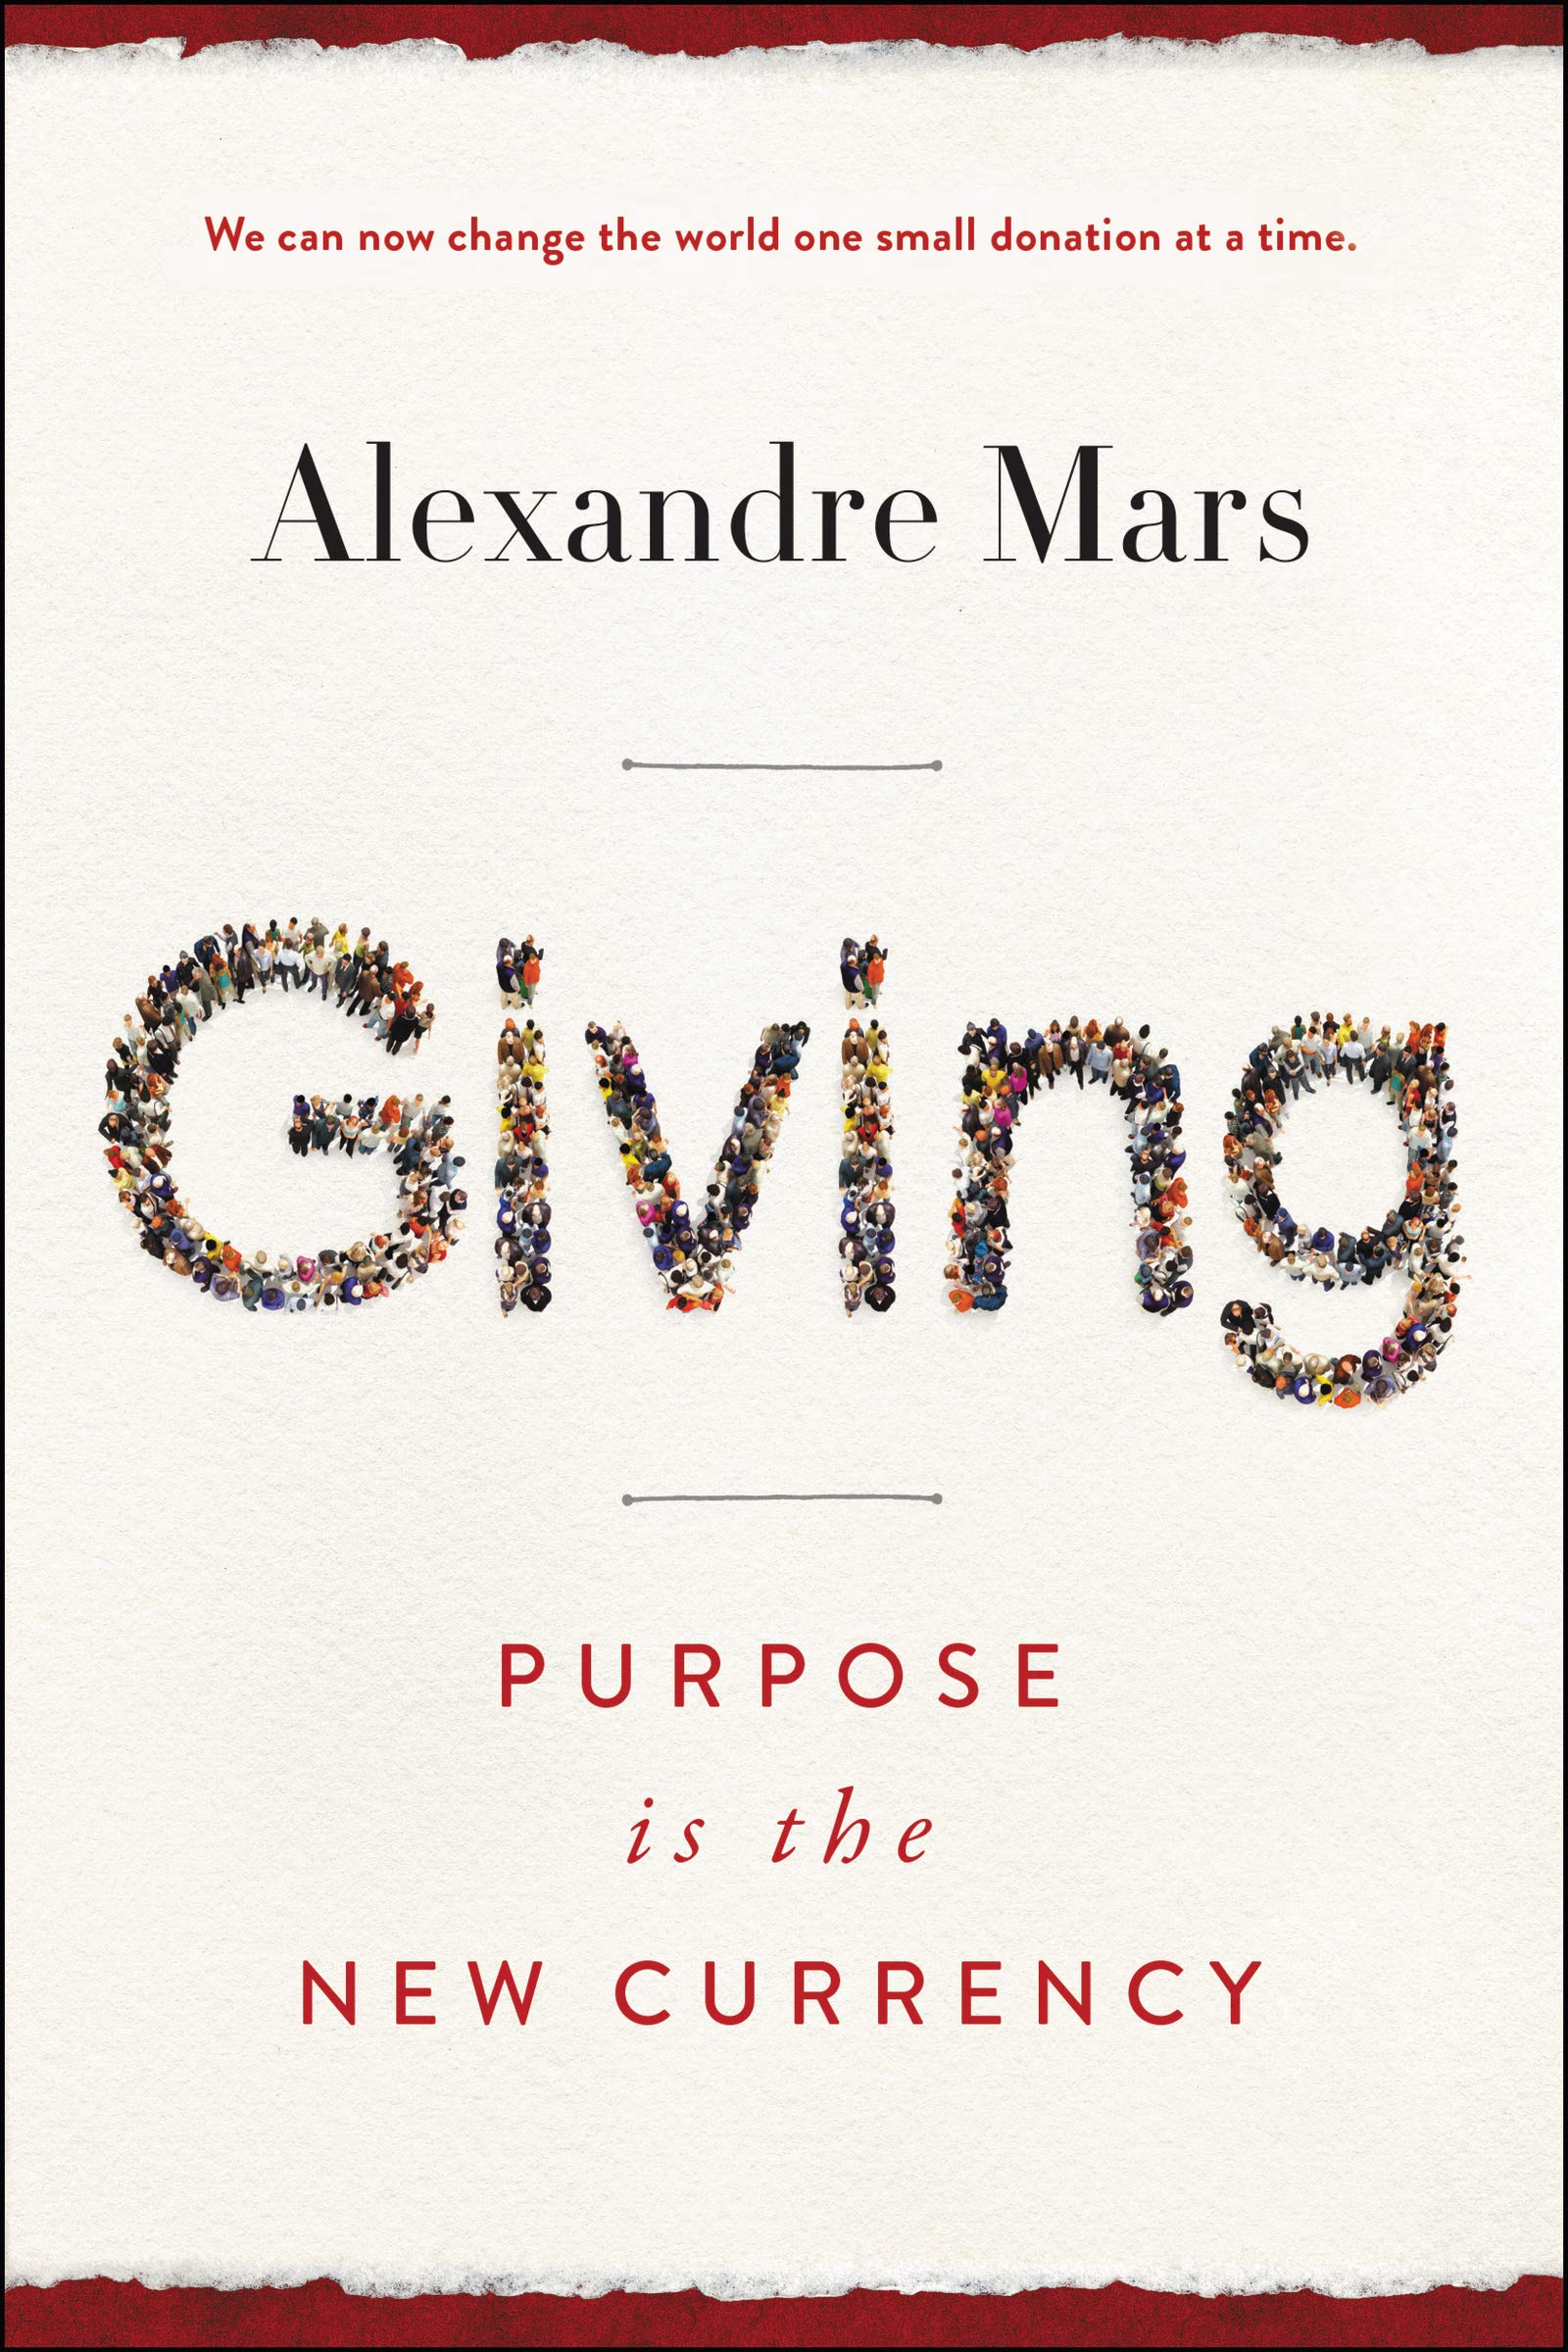 Alexandre Mars Giving: Purpose is the New Currency